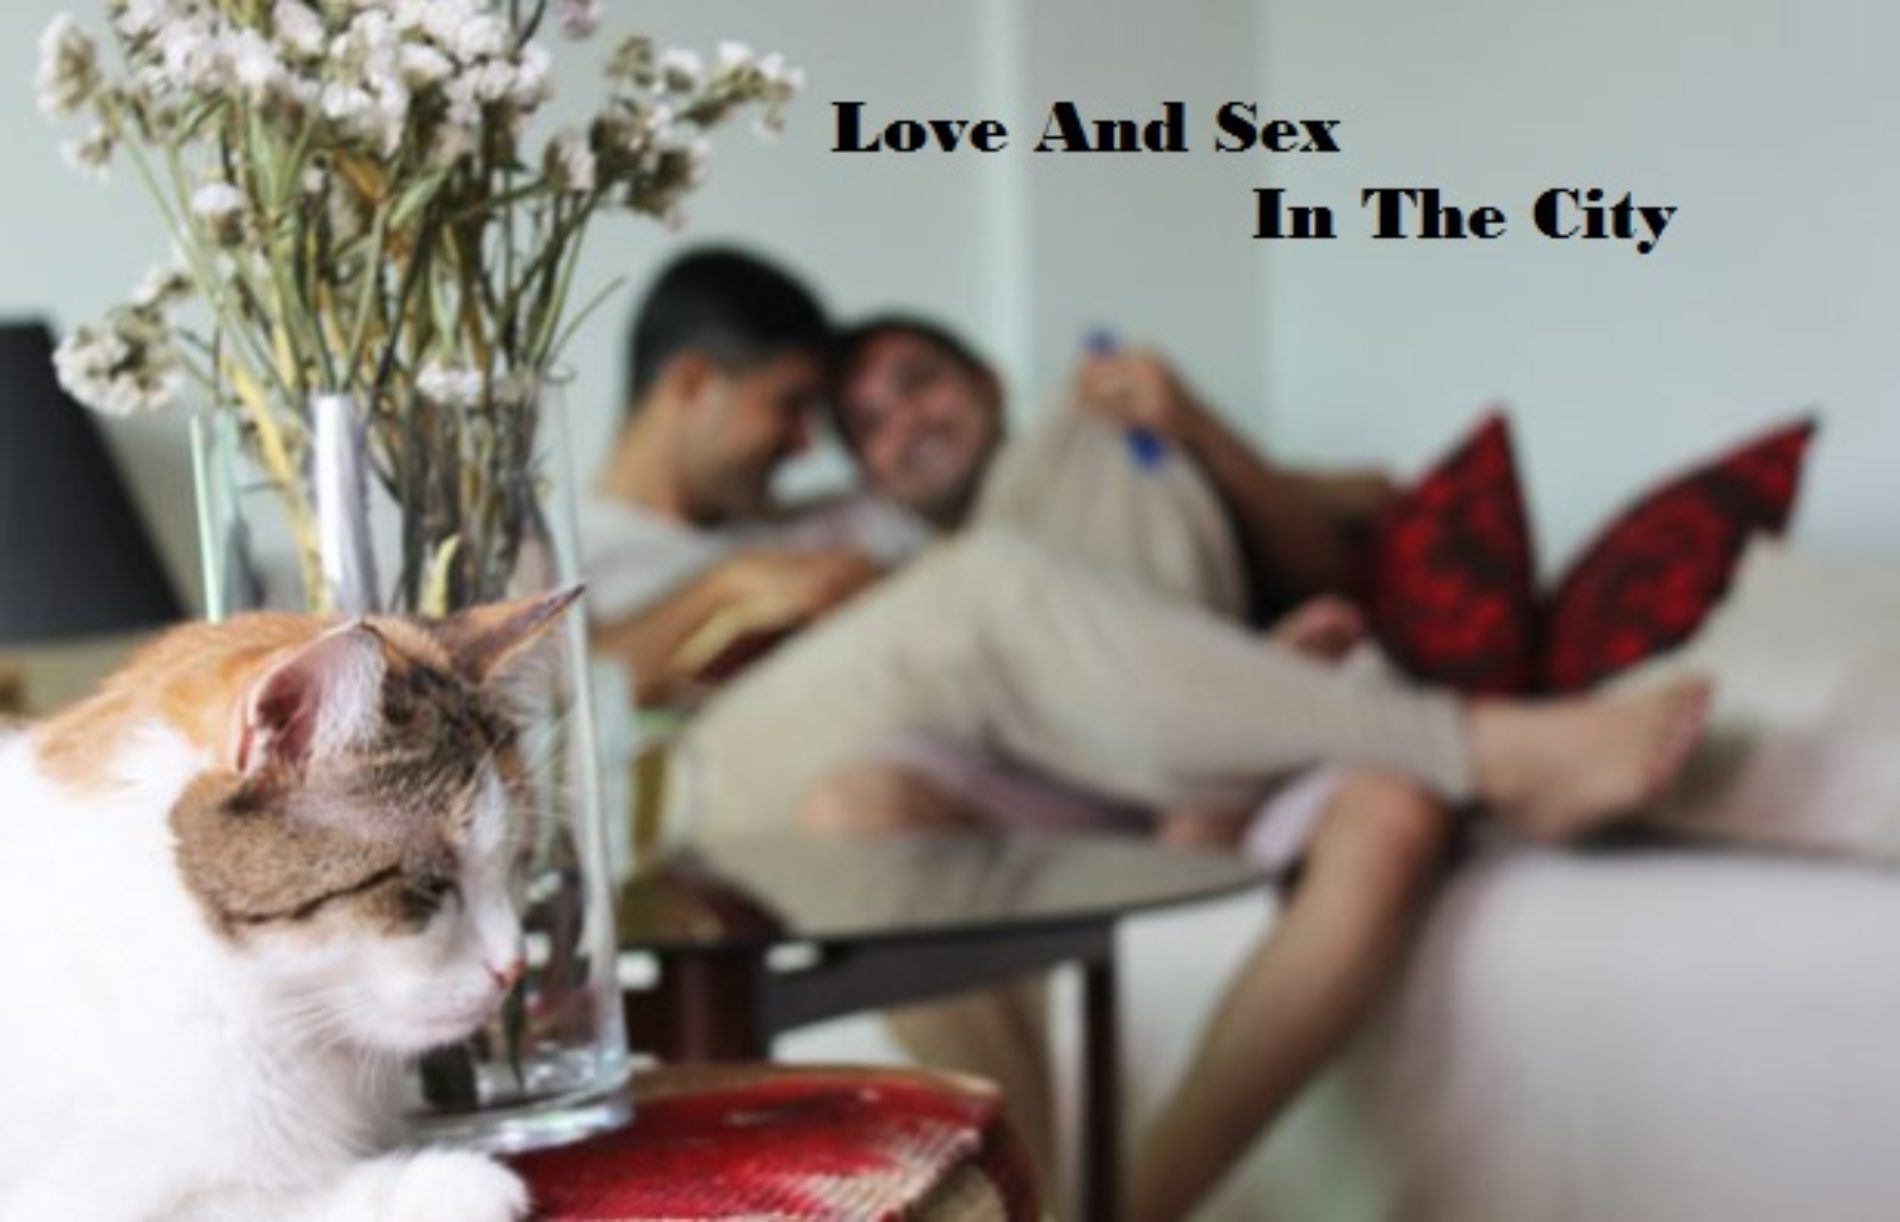 LOVE AND SEX IN THE CITY (Episode 31)